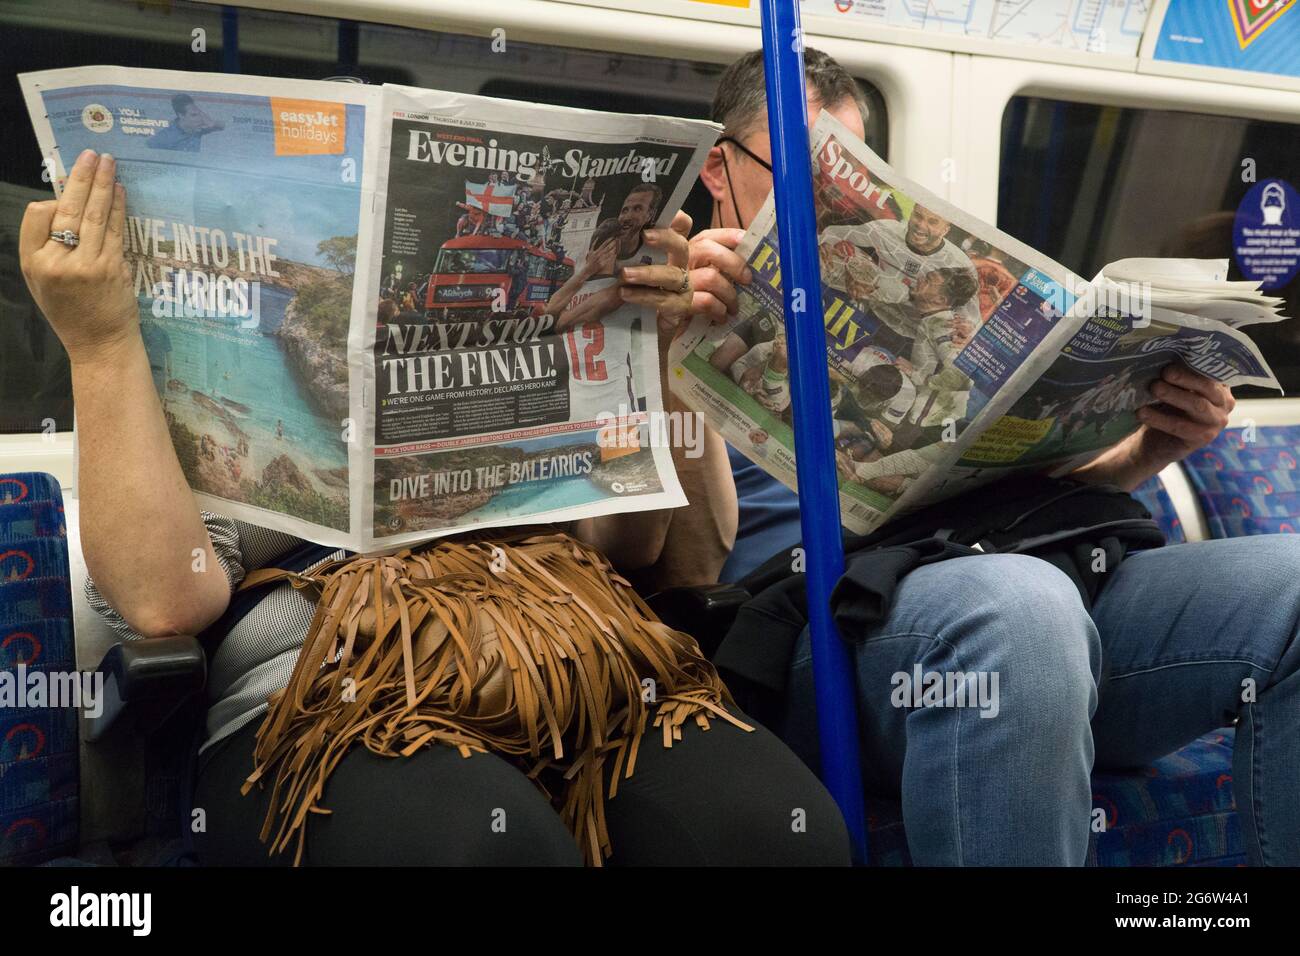 London, UK, 8 July 2021: The England men's football team are through to the EURO 2020 final and dominate the front and back pages of the newspapers, as read by a couple on the London underground. A full page Easyjet advert hopes to lure customers who might take advantage of the relaxation of quarantine rules for Amber List countries from 19 July. Anna Watson/Alamy Live News Stock Photo